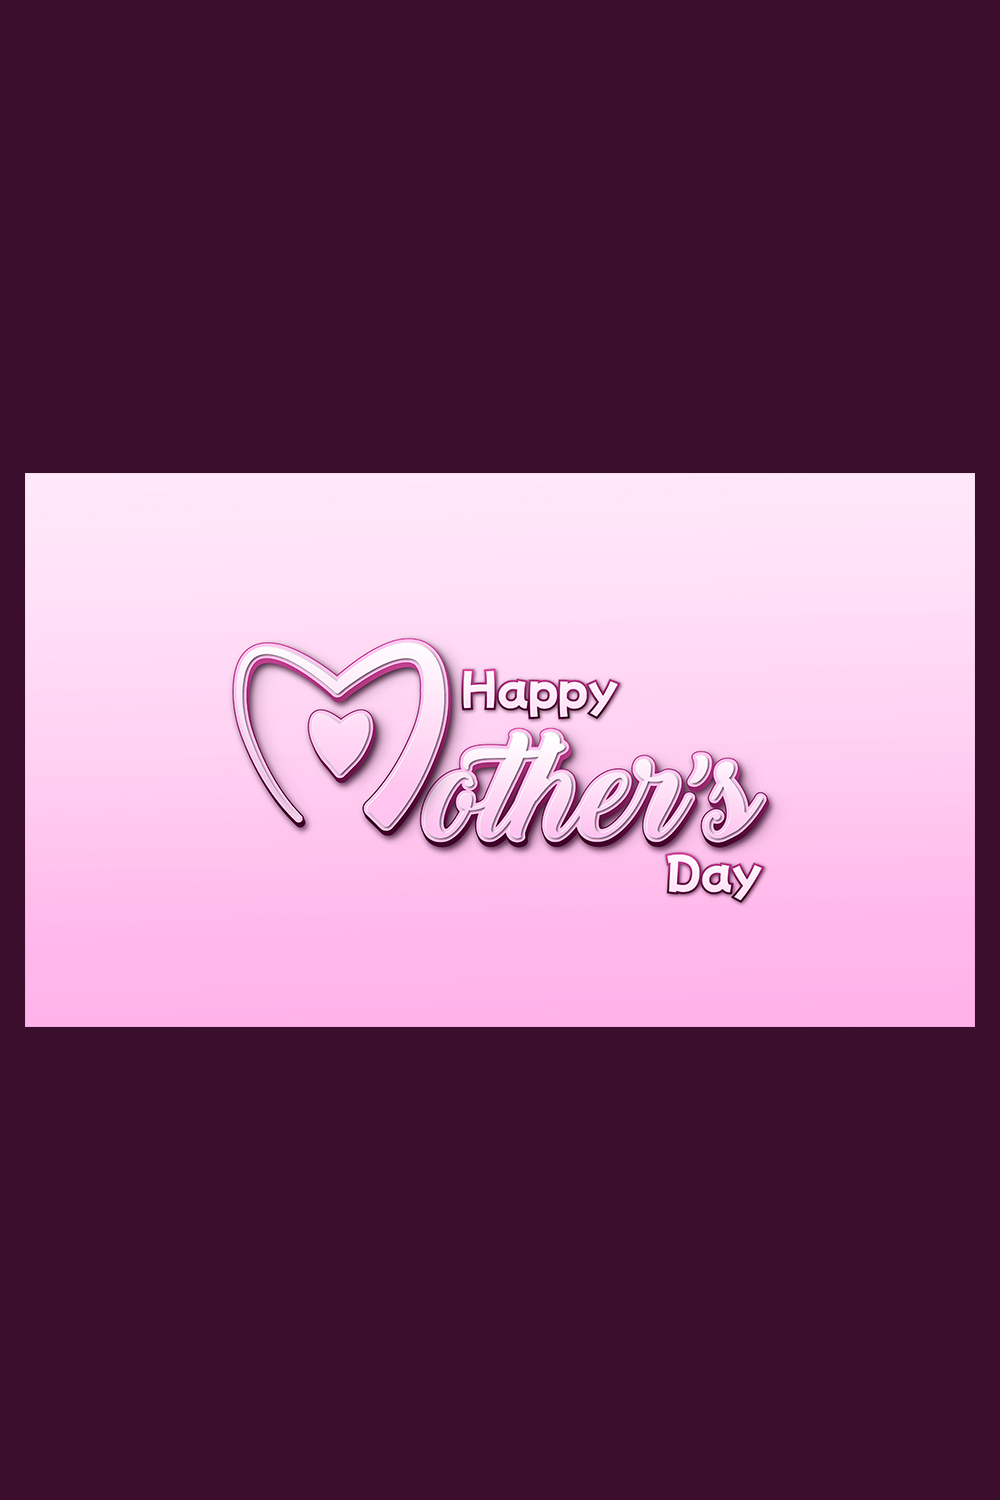 Happy mother's day greeting background design with 3D heart Shape pinterest preview image.